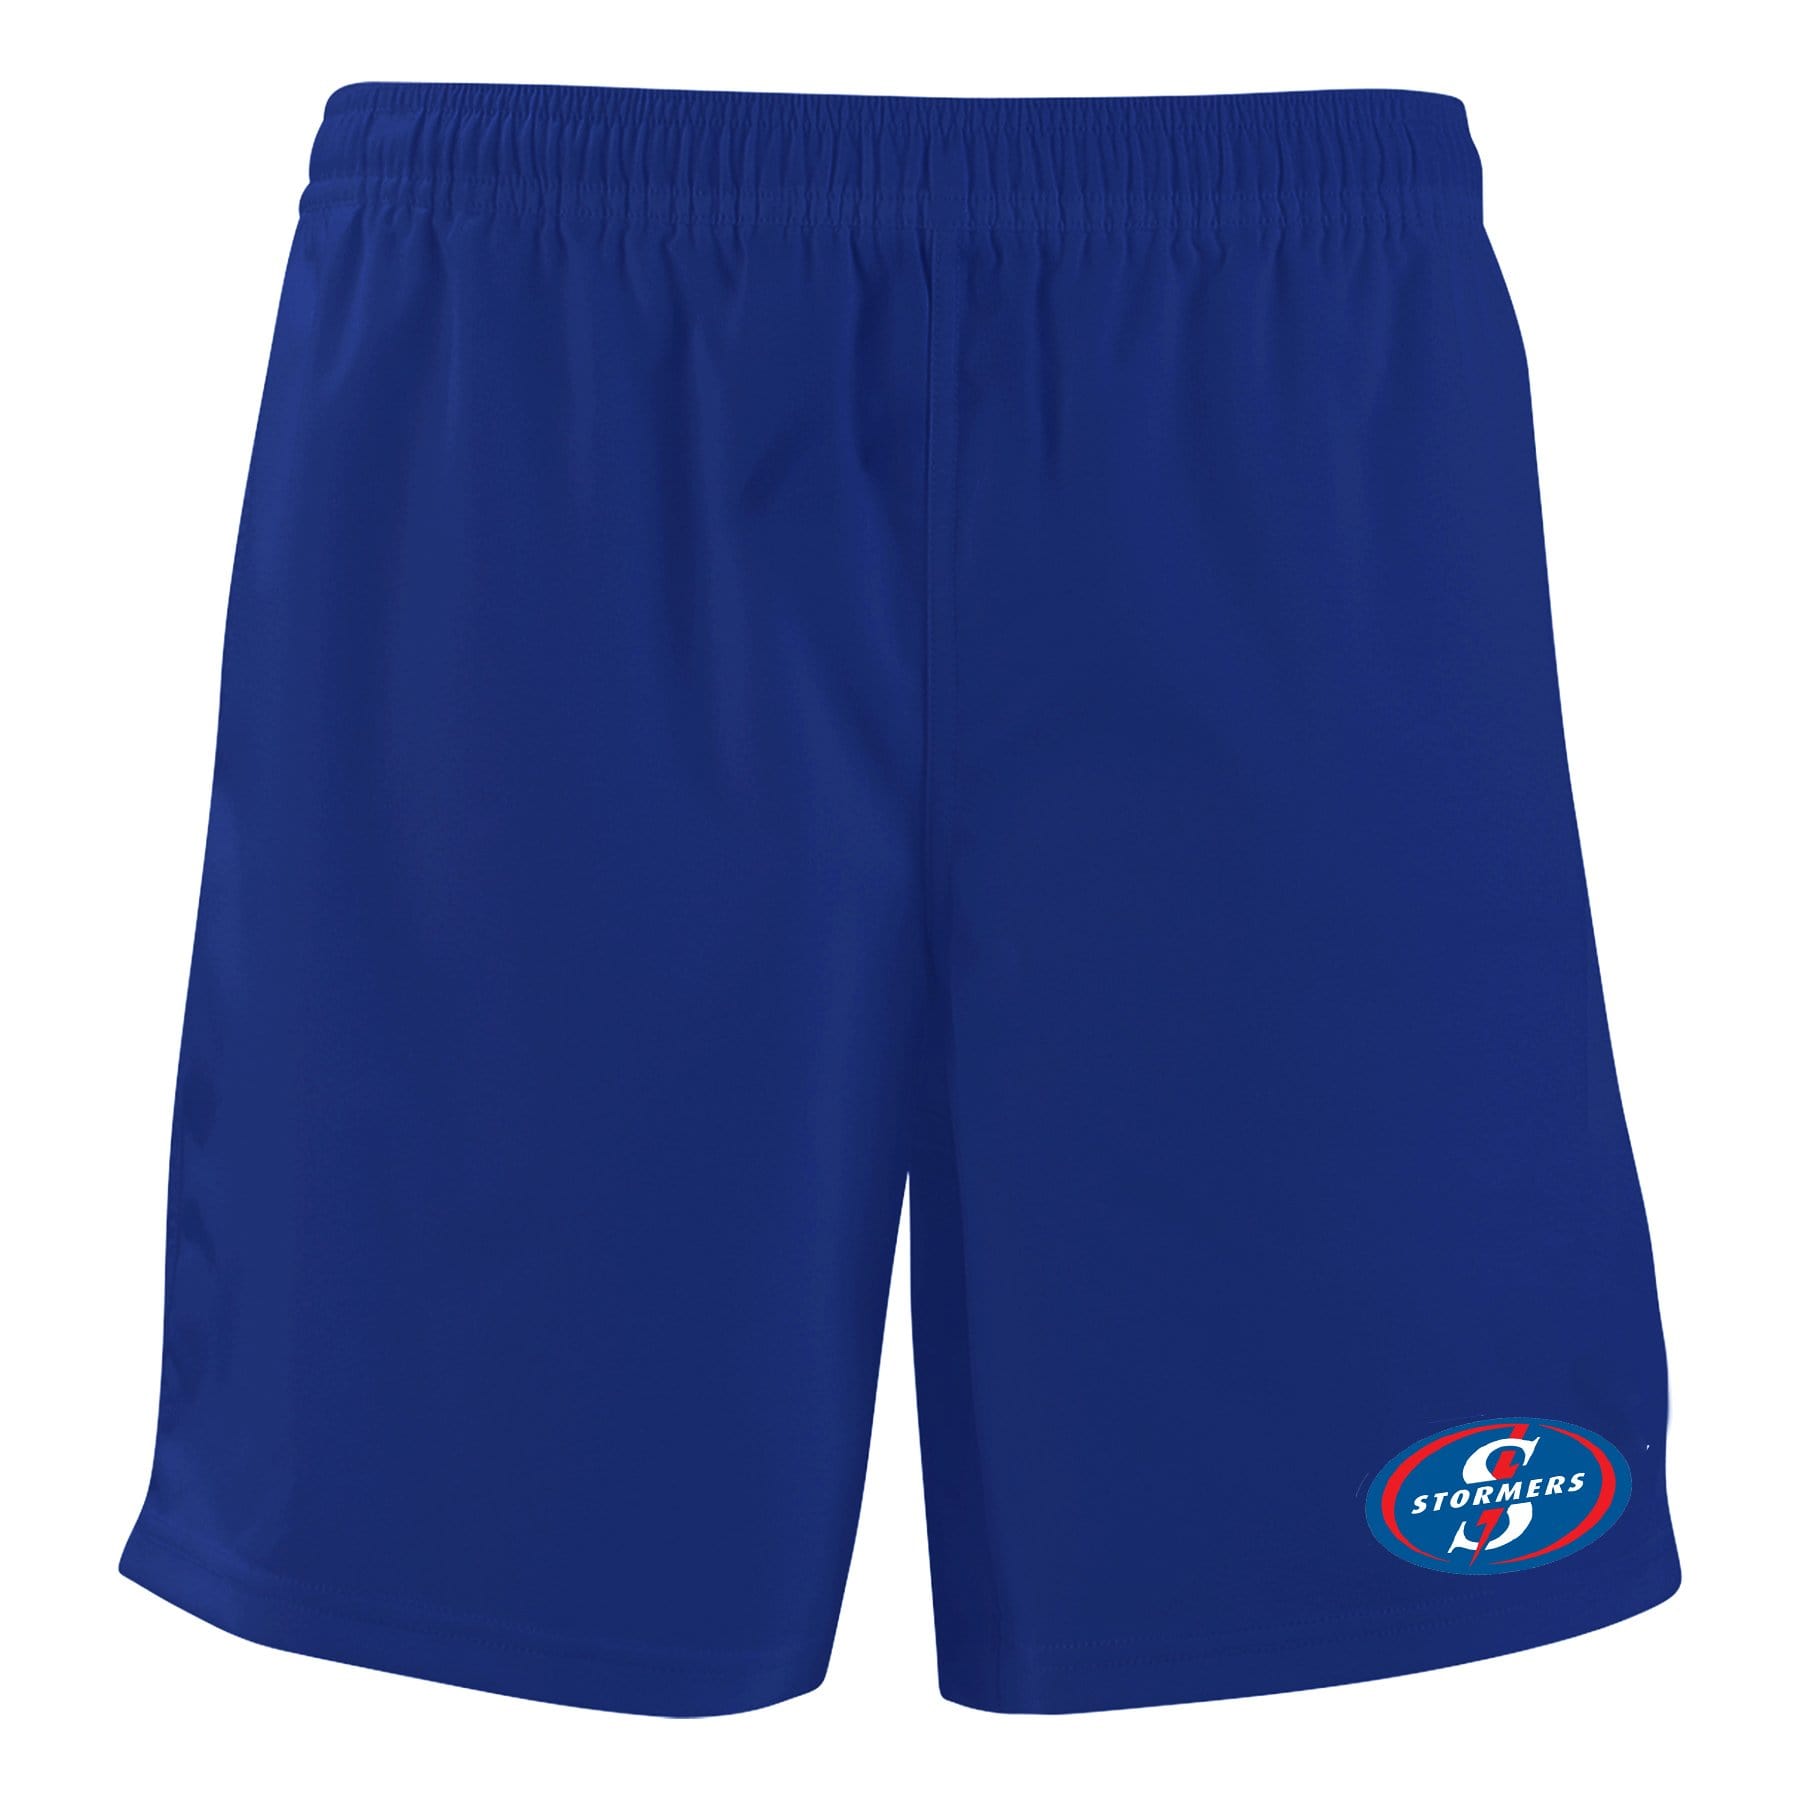 Rugby Lifestyle Shorts - World Rugby Shop